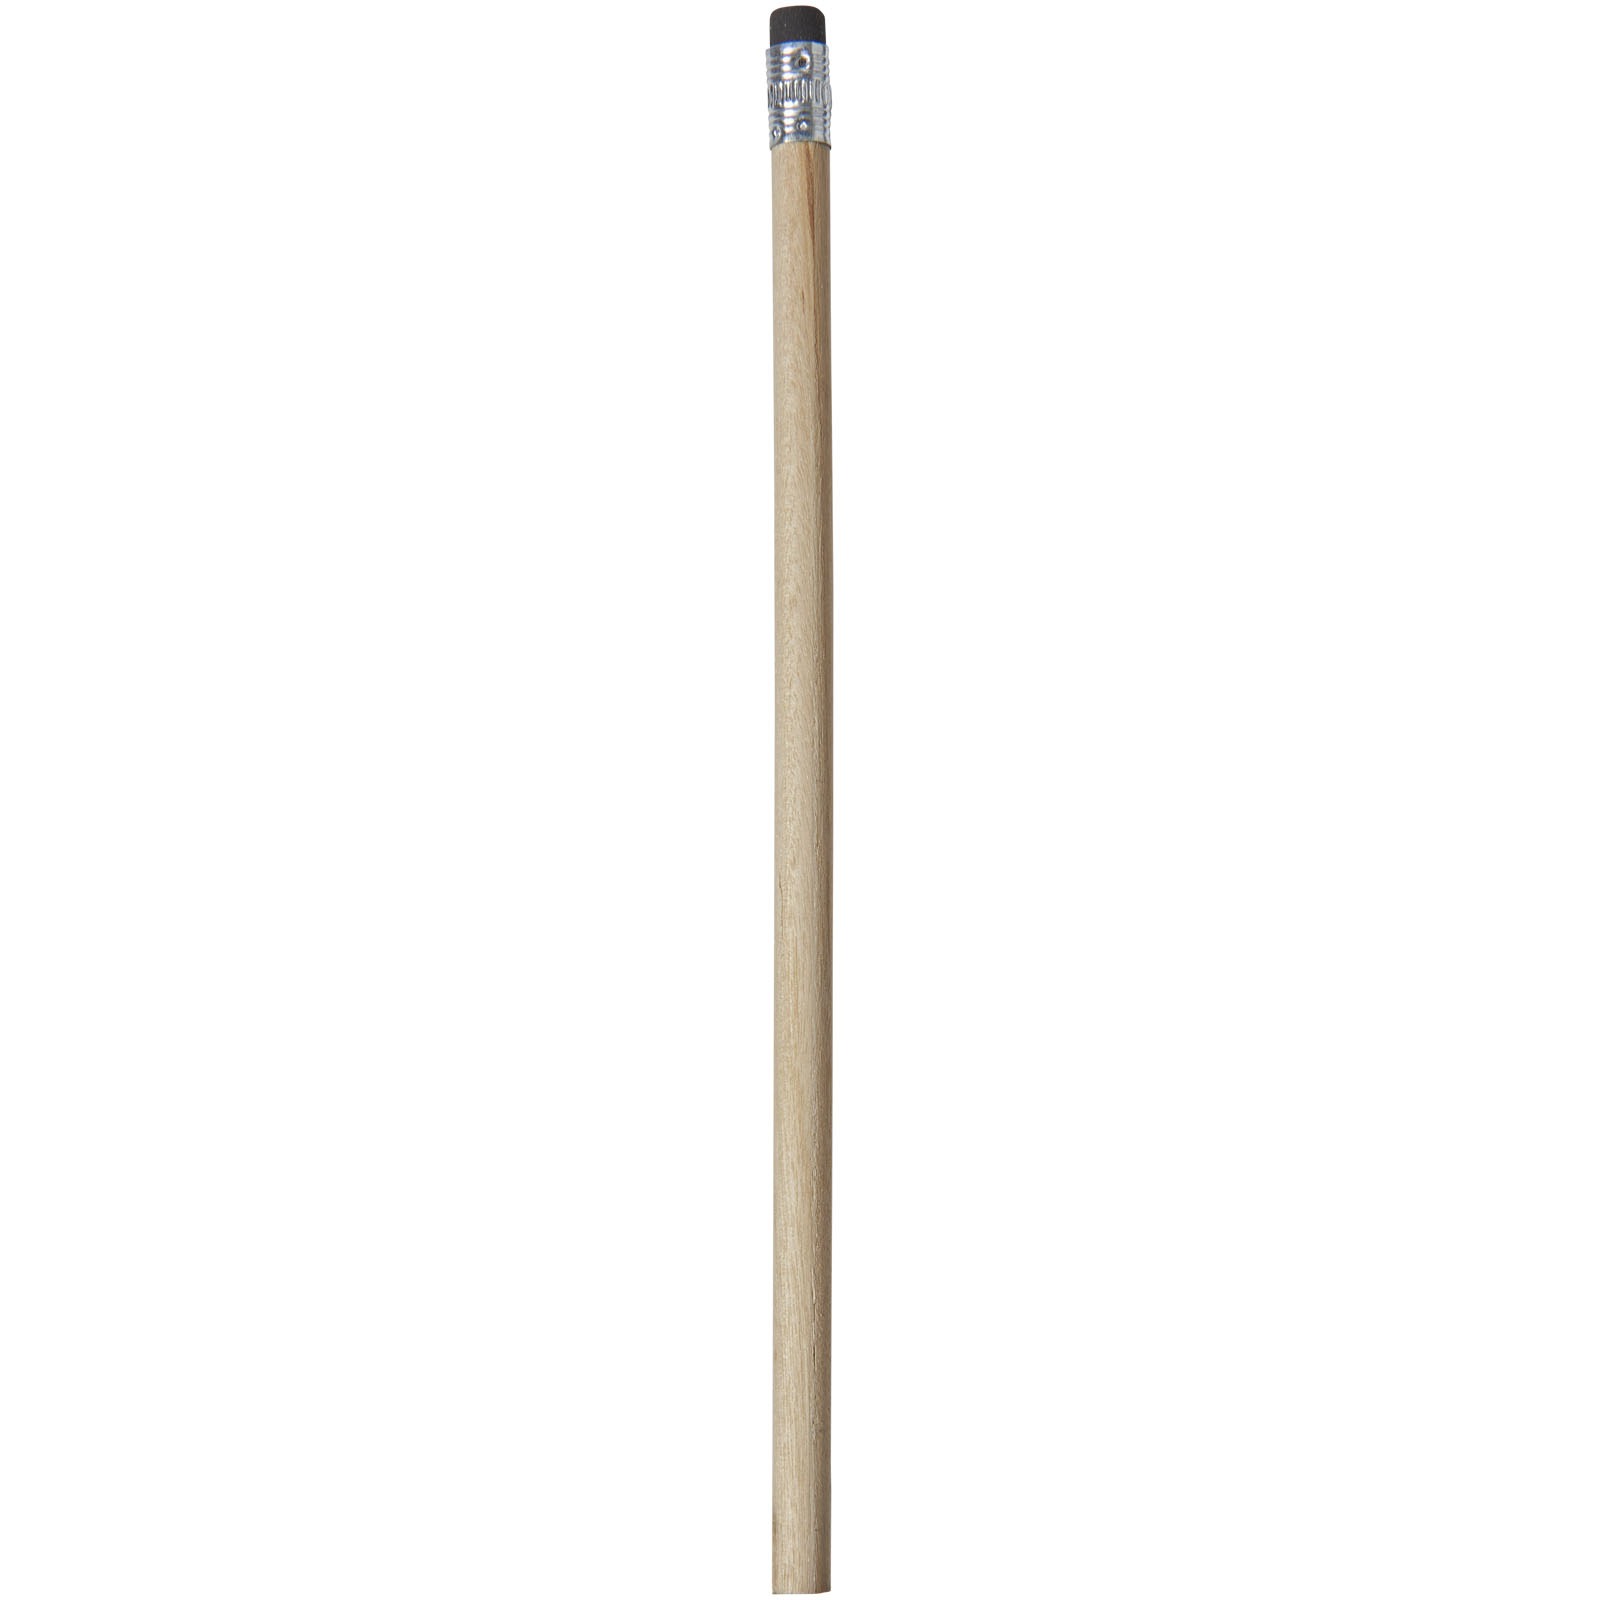 Cay wooden pencil with eraser - JSM Brand Exposure